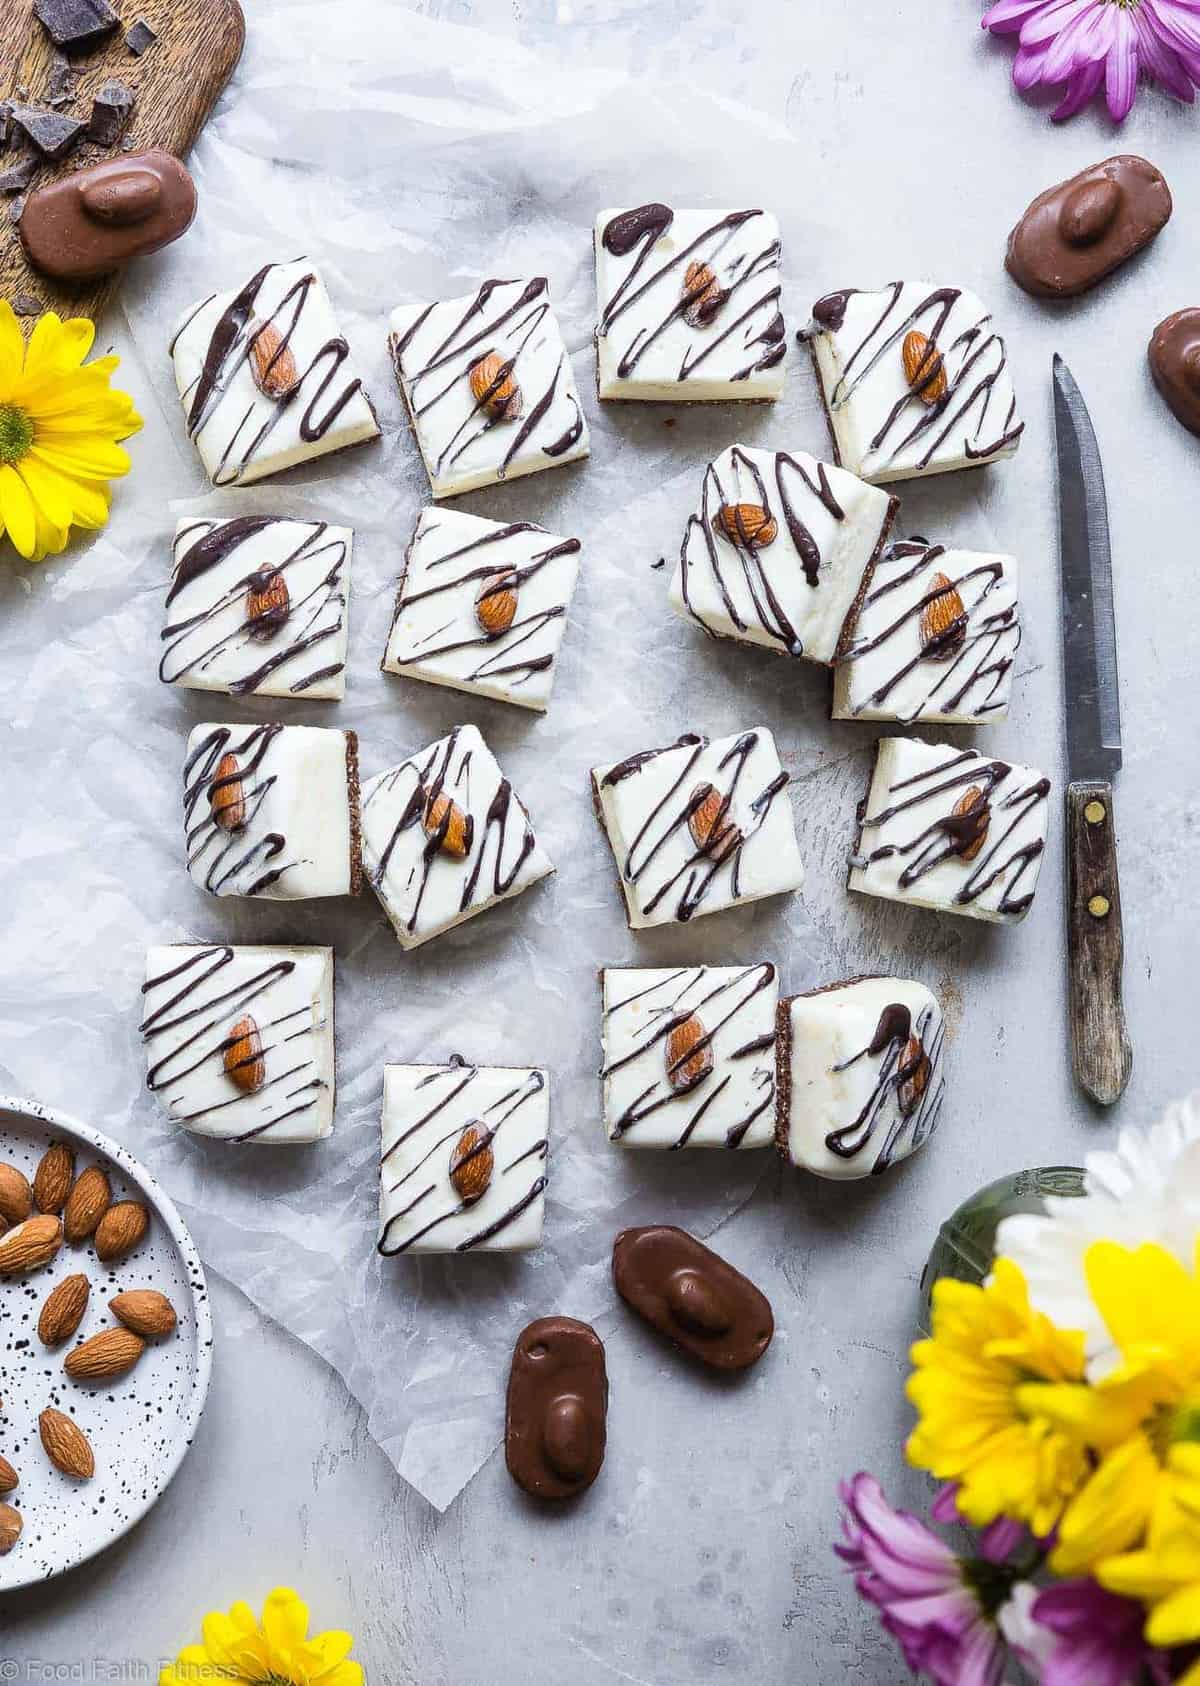 Healthy Almond Joy Ice Cream Bars -  These easy, 5 ingredient Almond Joy Ice Cream Bars are a healthier, protein packed Summer dessert that is gluten free and  only 116 calories! Kids and adults are going to LOVE these! | #Foodfaithfitness | #Glutenfree #Healthy #NoBake #Chocolate #Dessert